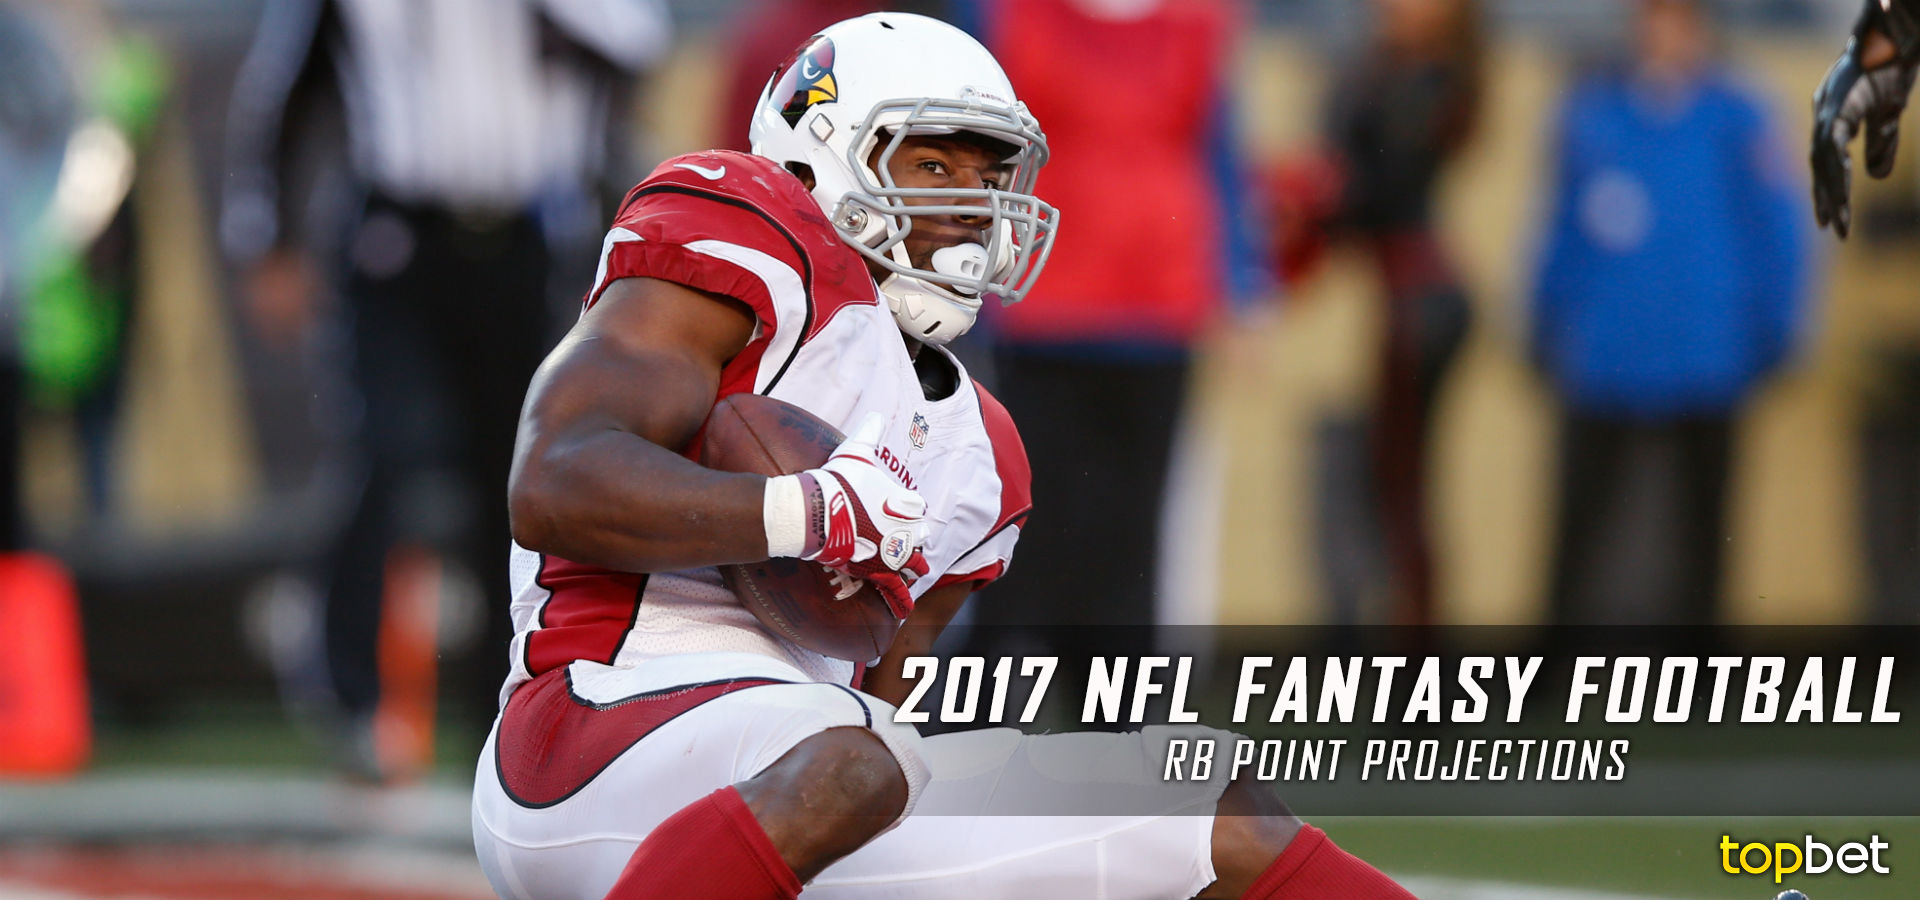 Fantasy Football RB Point Projections 201718 NFL Season